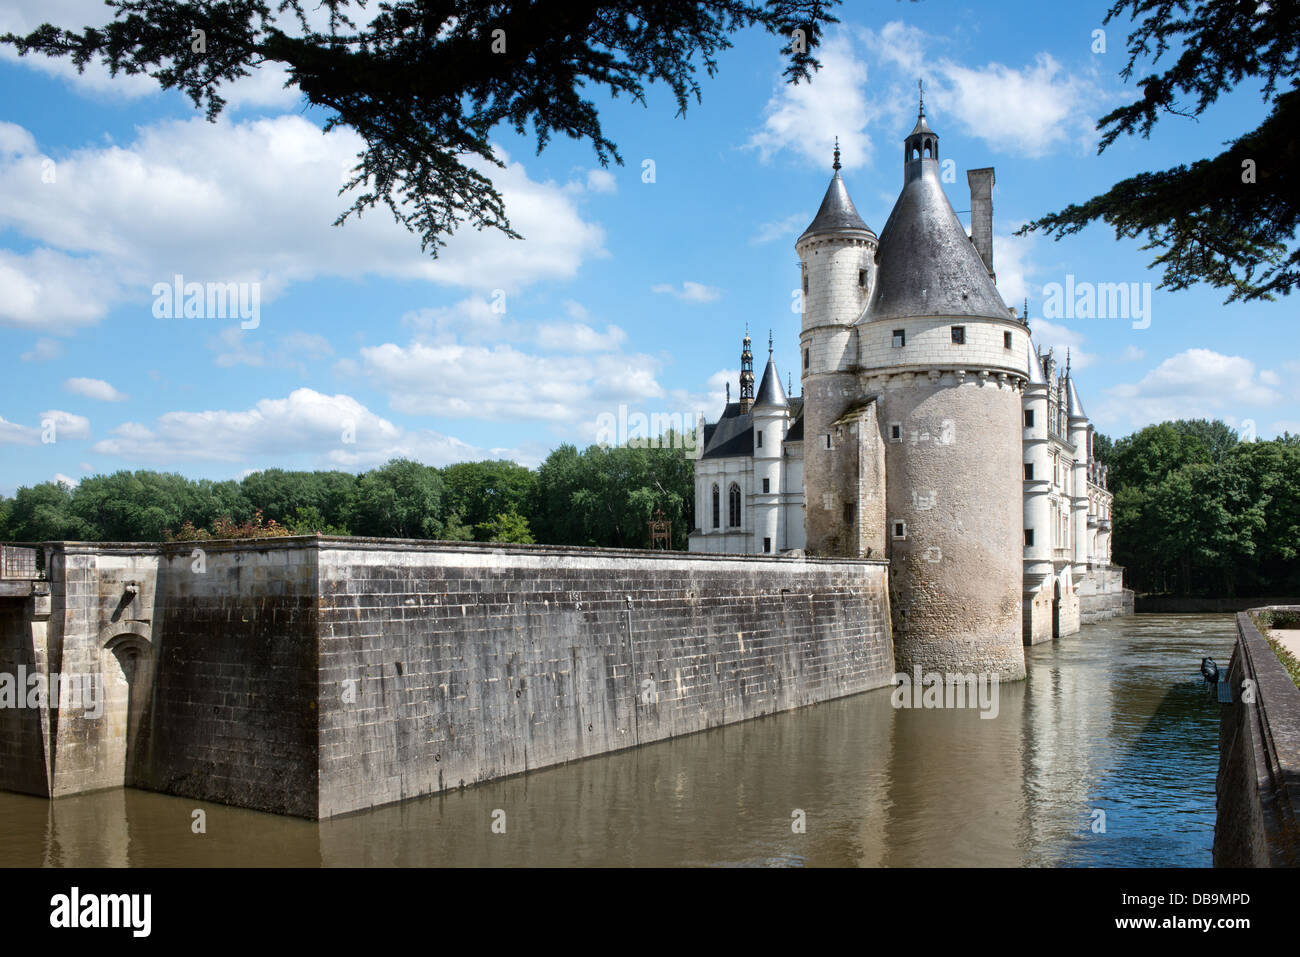 A landscape view of Château Chenonceau in the Loire valley, France showing the river and towers Stock Photo